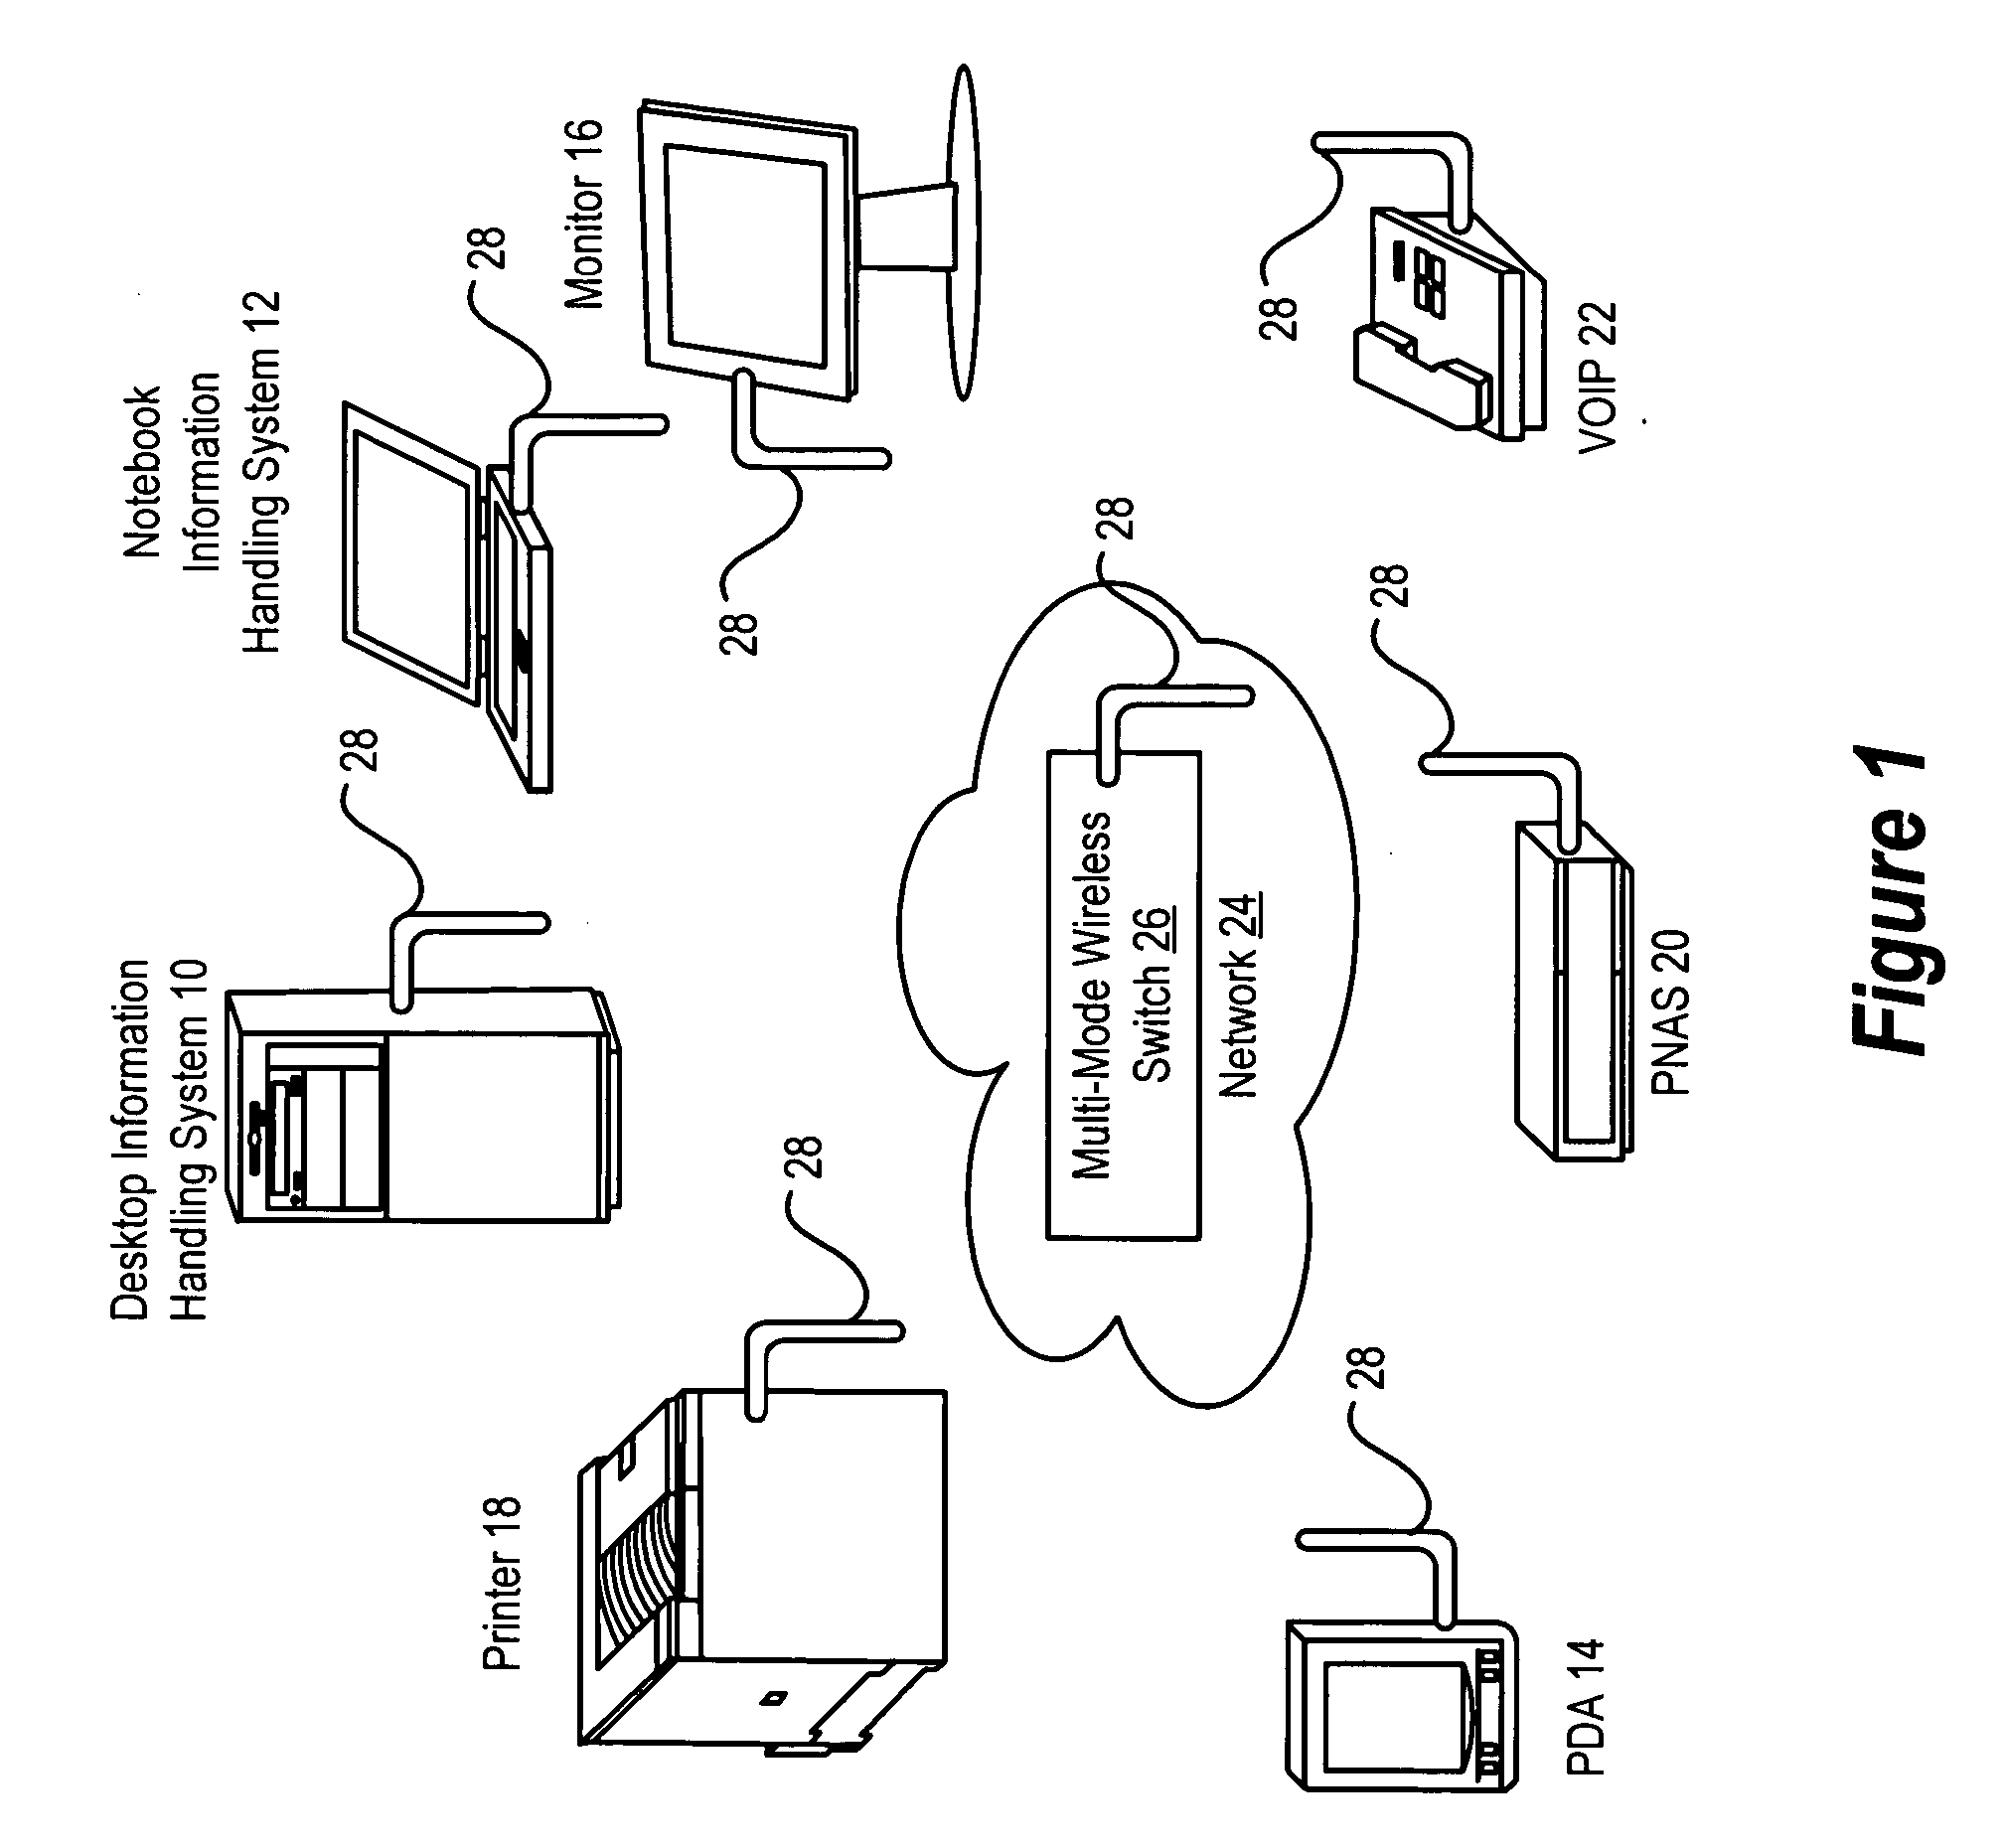 System and method for information handling system task selective wireless networking